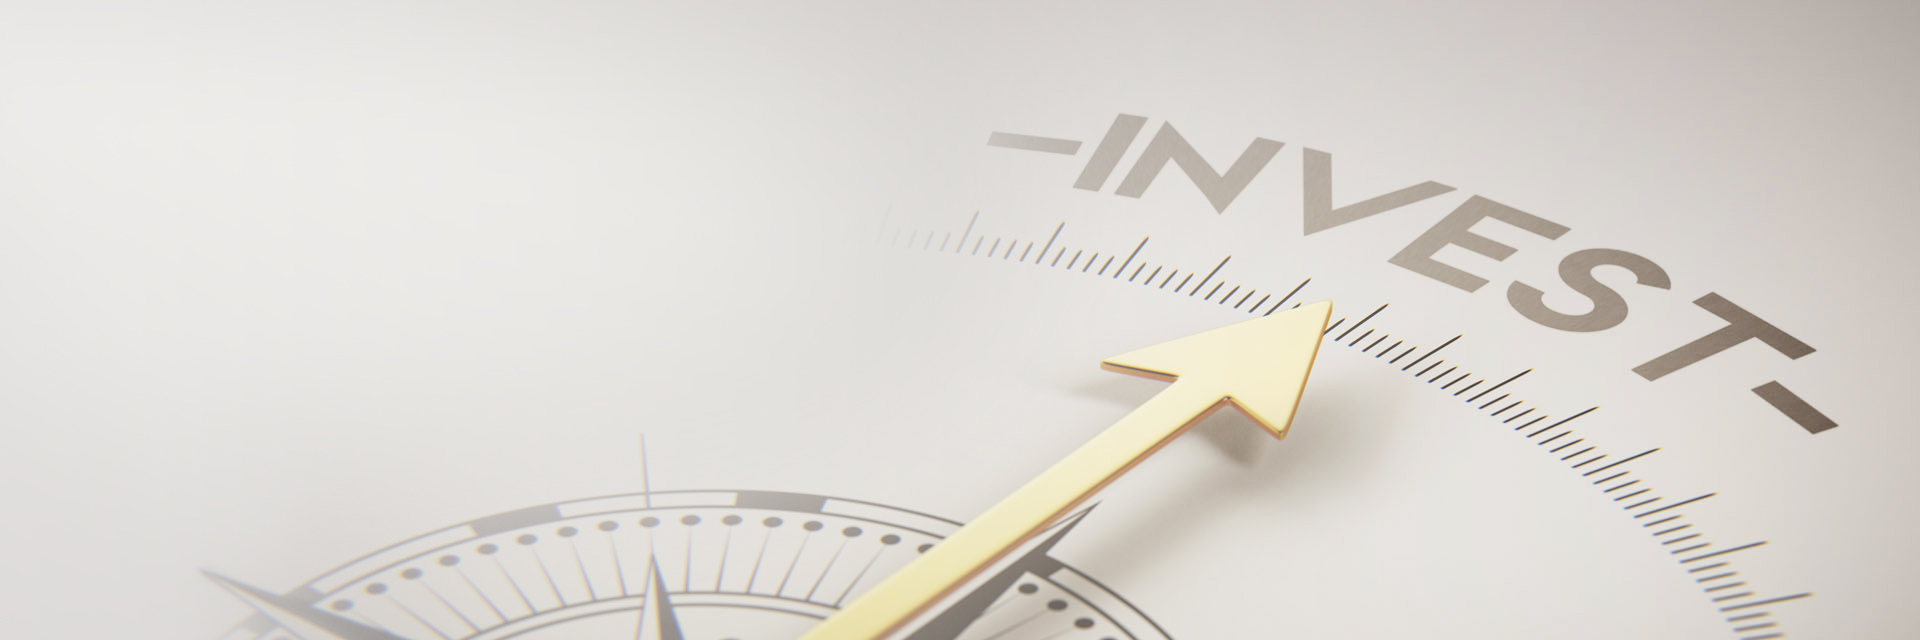 Image showing a close up of a compass pointing to the word "invest"